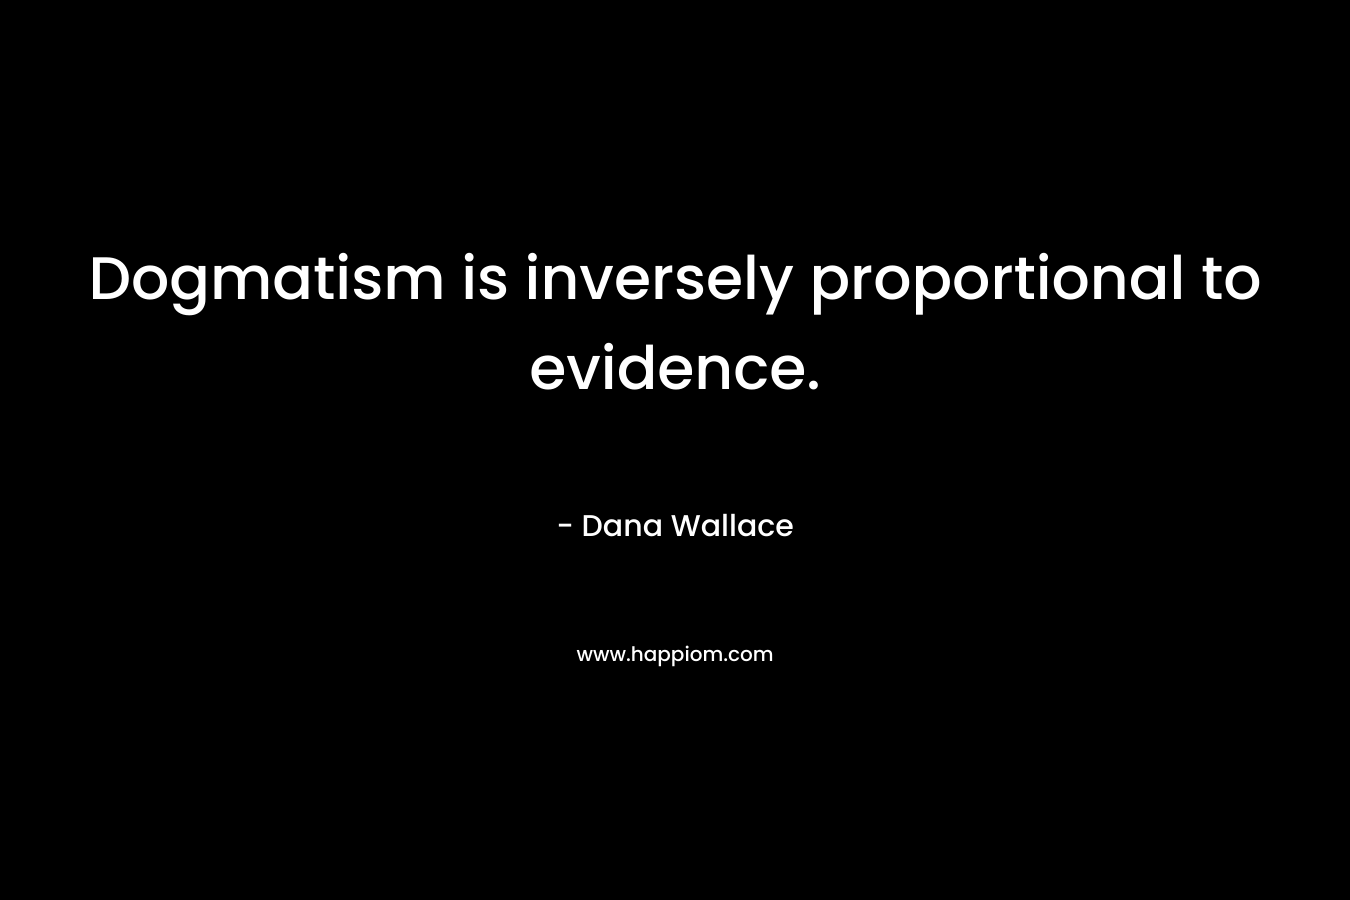 Dogmatism is inversely proportional to evidence.